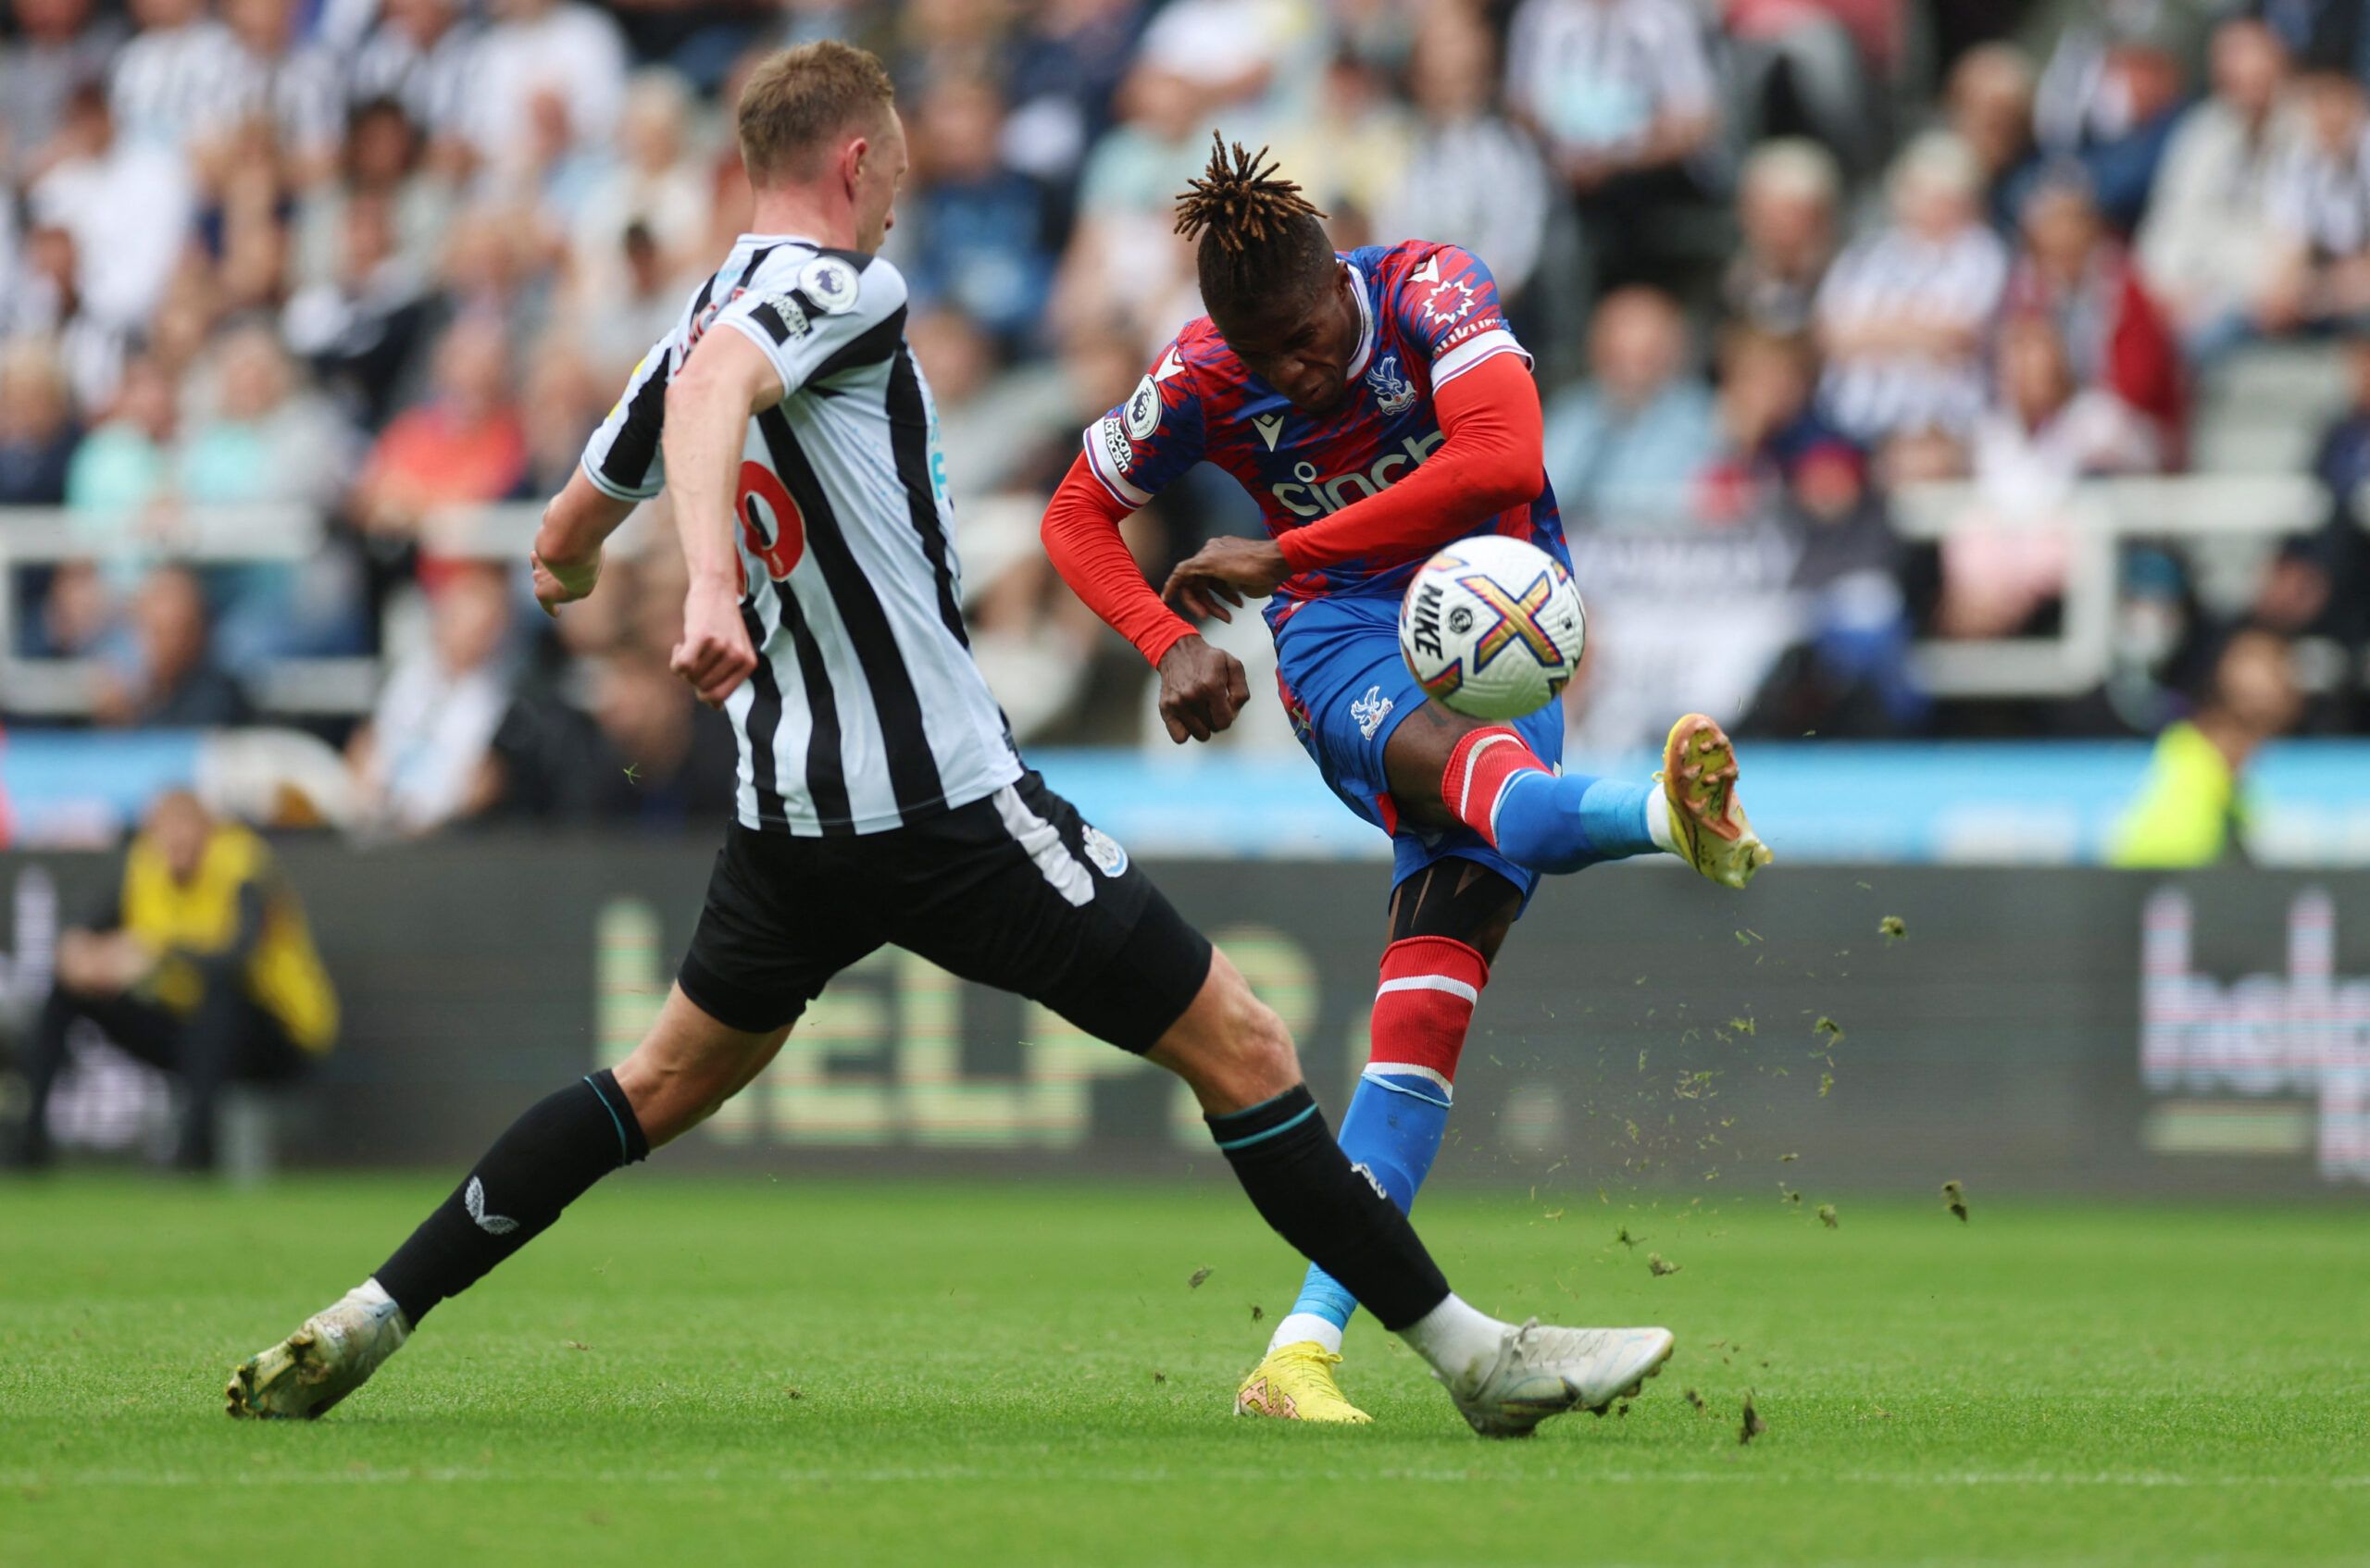 Soccer Football - Premier League - Newcastle United v Crystal Palace - St James' Park, Newcastle, Britain - September 3, 2022 Crystal Palace's Wilfried Zaha in action with Newcastle United's Sean Longstaff Action Images via Reuters/Lee Smith EDITORIAL USE ONLY. No use with unauthorized audio, video, data, fixture lists, club/league logos or 'live' services. Online in-match use limited to 75 images, no video emulation. No use in betting, games or single club /league/player publications.  Please c